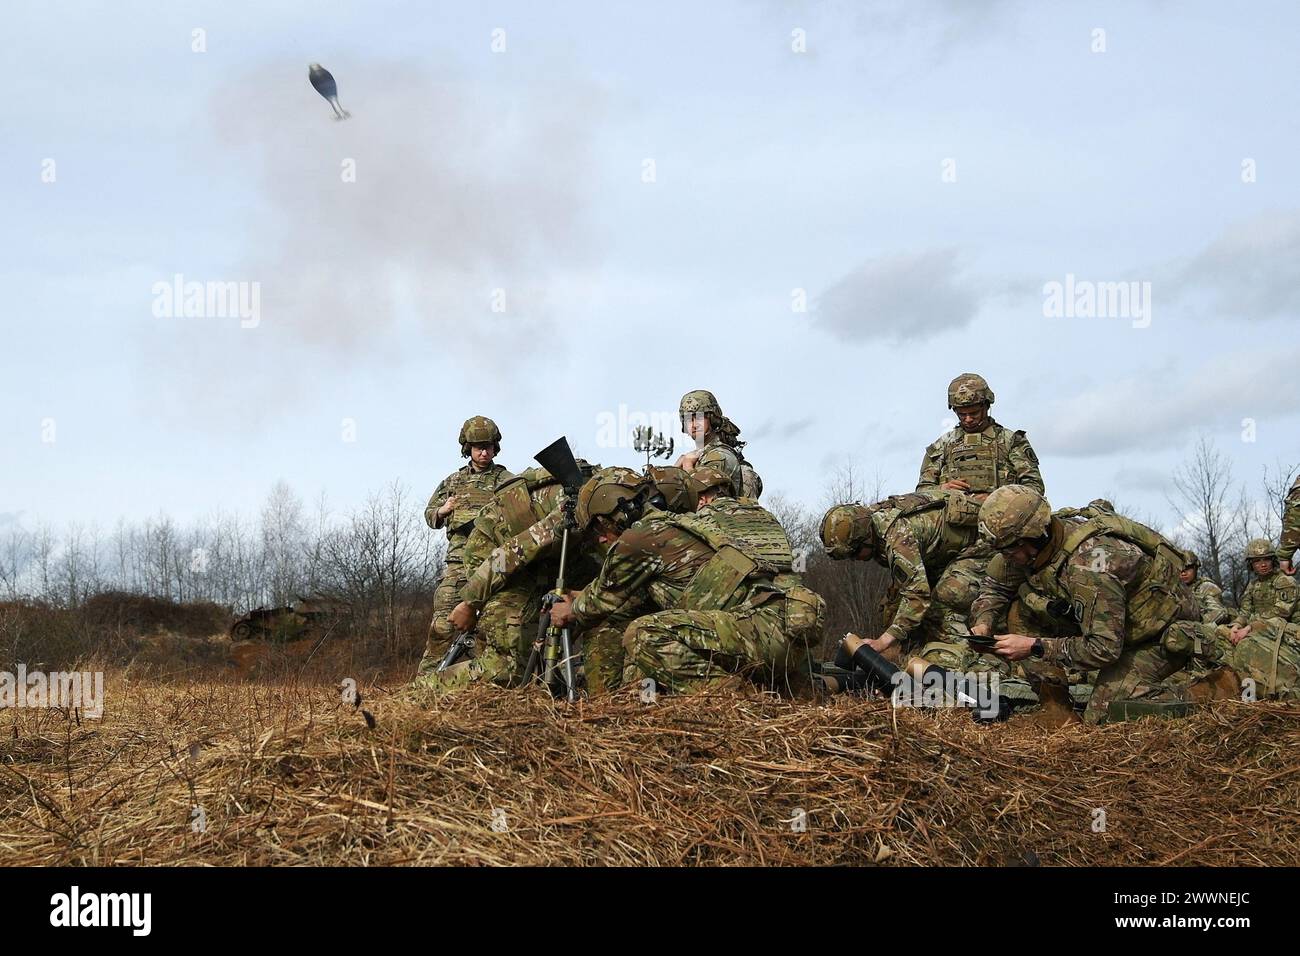 U.S. Army Paratroopers assigned to the 1st Battalion, 503rd Infantry Regiment, 173rd Airborne Brigade fire an  M252 81 mm mortar system during Eagle Ursa exercise at the training range in Slunj, Croatia, Feb. 24, 2024. The 173rd Airborne Brigade is the U.S. Army's Contingency Response Force in Europe, providing rapidly deployable forces to the United States European, African, and Central Command areas of responsibility. Forward deployed across Italy and Germany, the brigade routinely trains alongside NATO allies and partners to build partnerships and strengthen the alliance.  Army Stock Photo